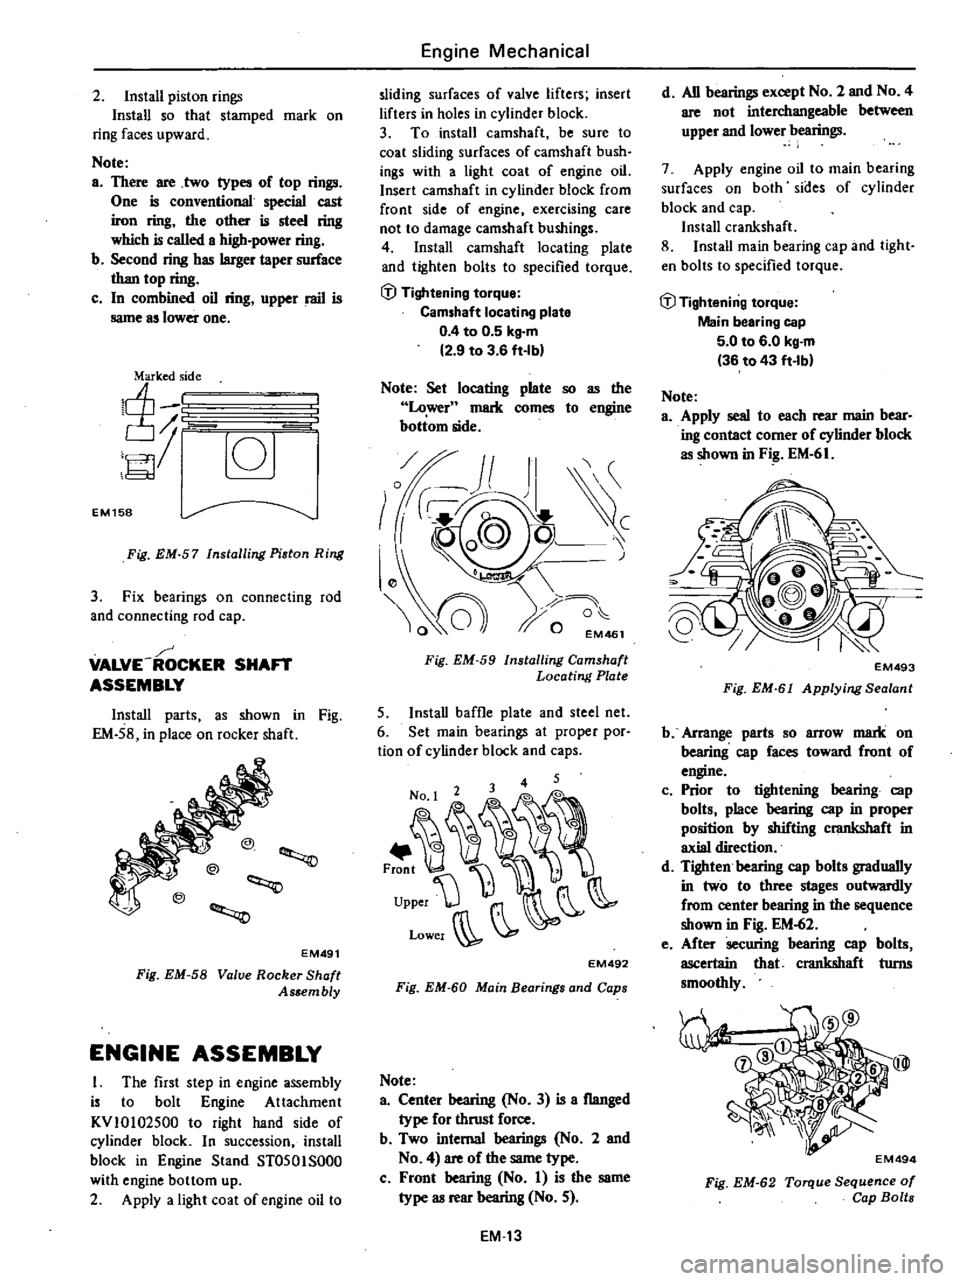 DATSUN 210 1979 Workshop Manual 
2

Install

piston 
rings

Install 
so 
that

stamped 
mark 
on

ring 
faces

upward

Note

a 
There 
are 
two

types 
of

top 
rings

One 
is 
conventional

special 
cast

iron

ring 
the 
other 
is